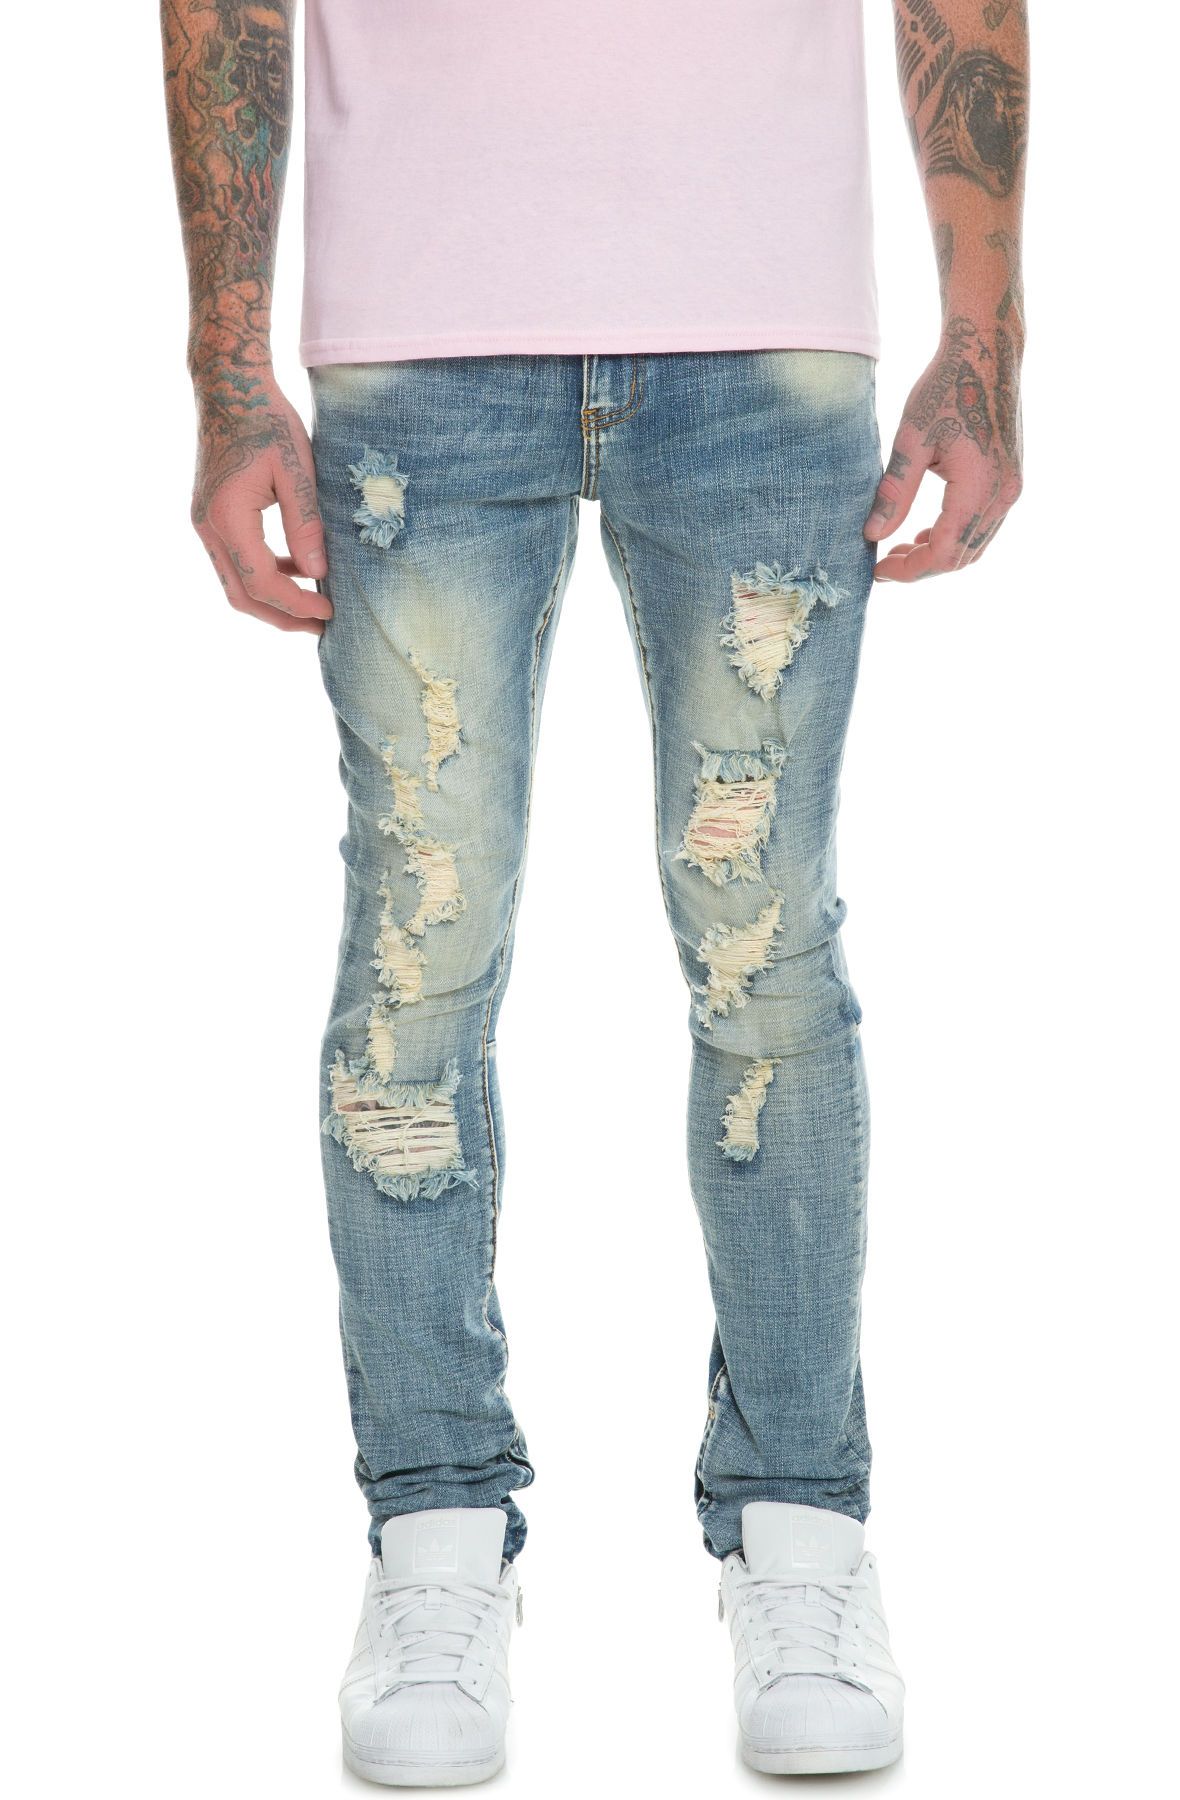 pink dolphin jeans